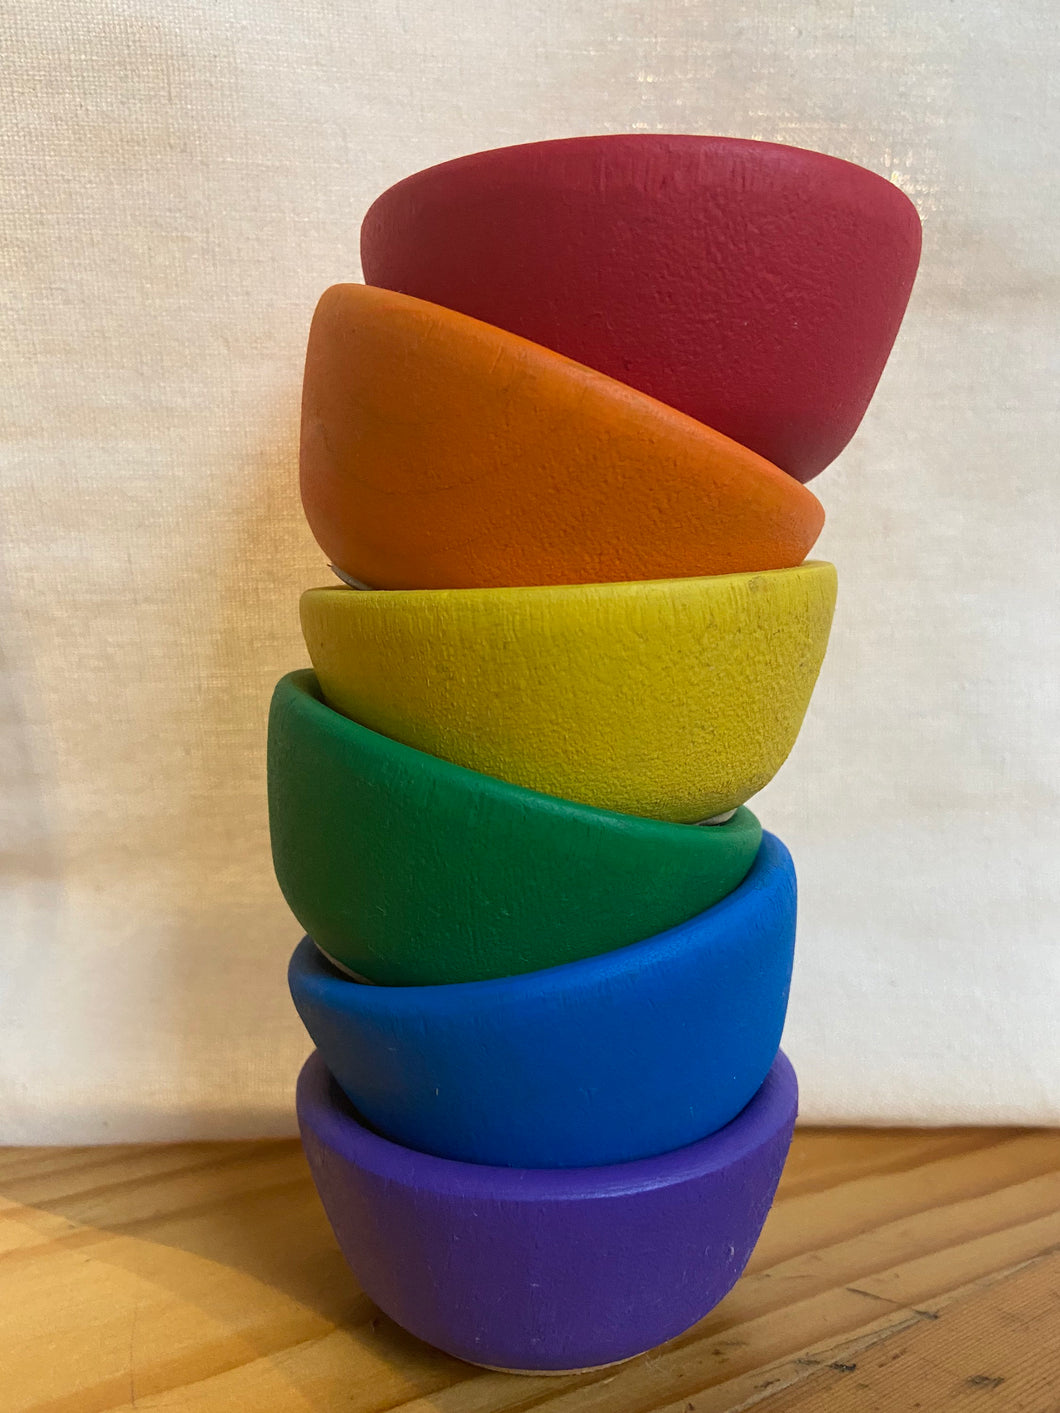 Hand Painted Rainbow Wooden Mini Stacking Bowls - Set of 6 - Bowls Only